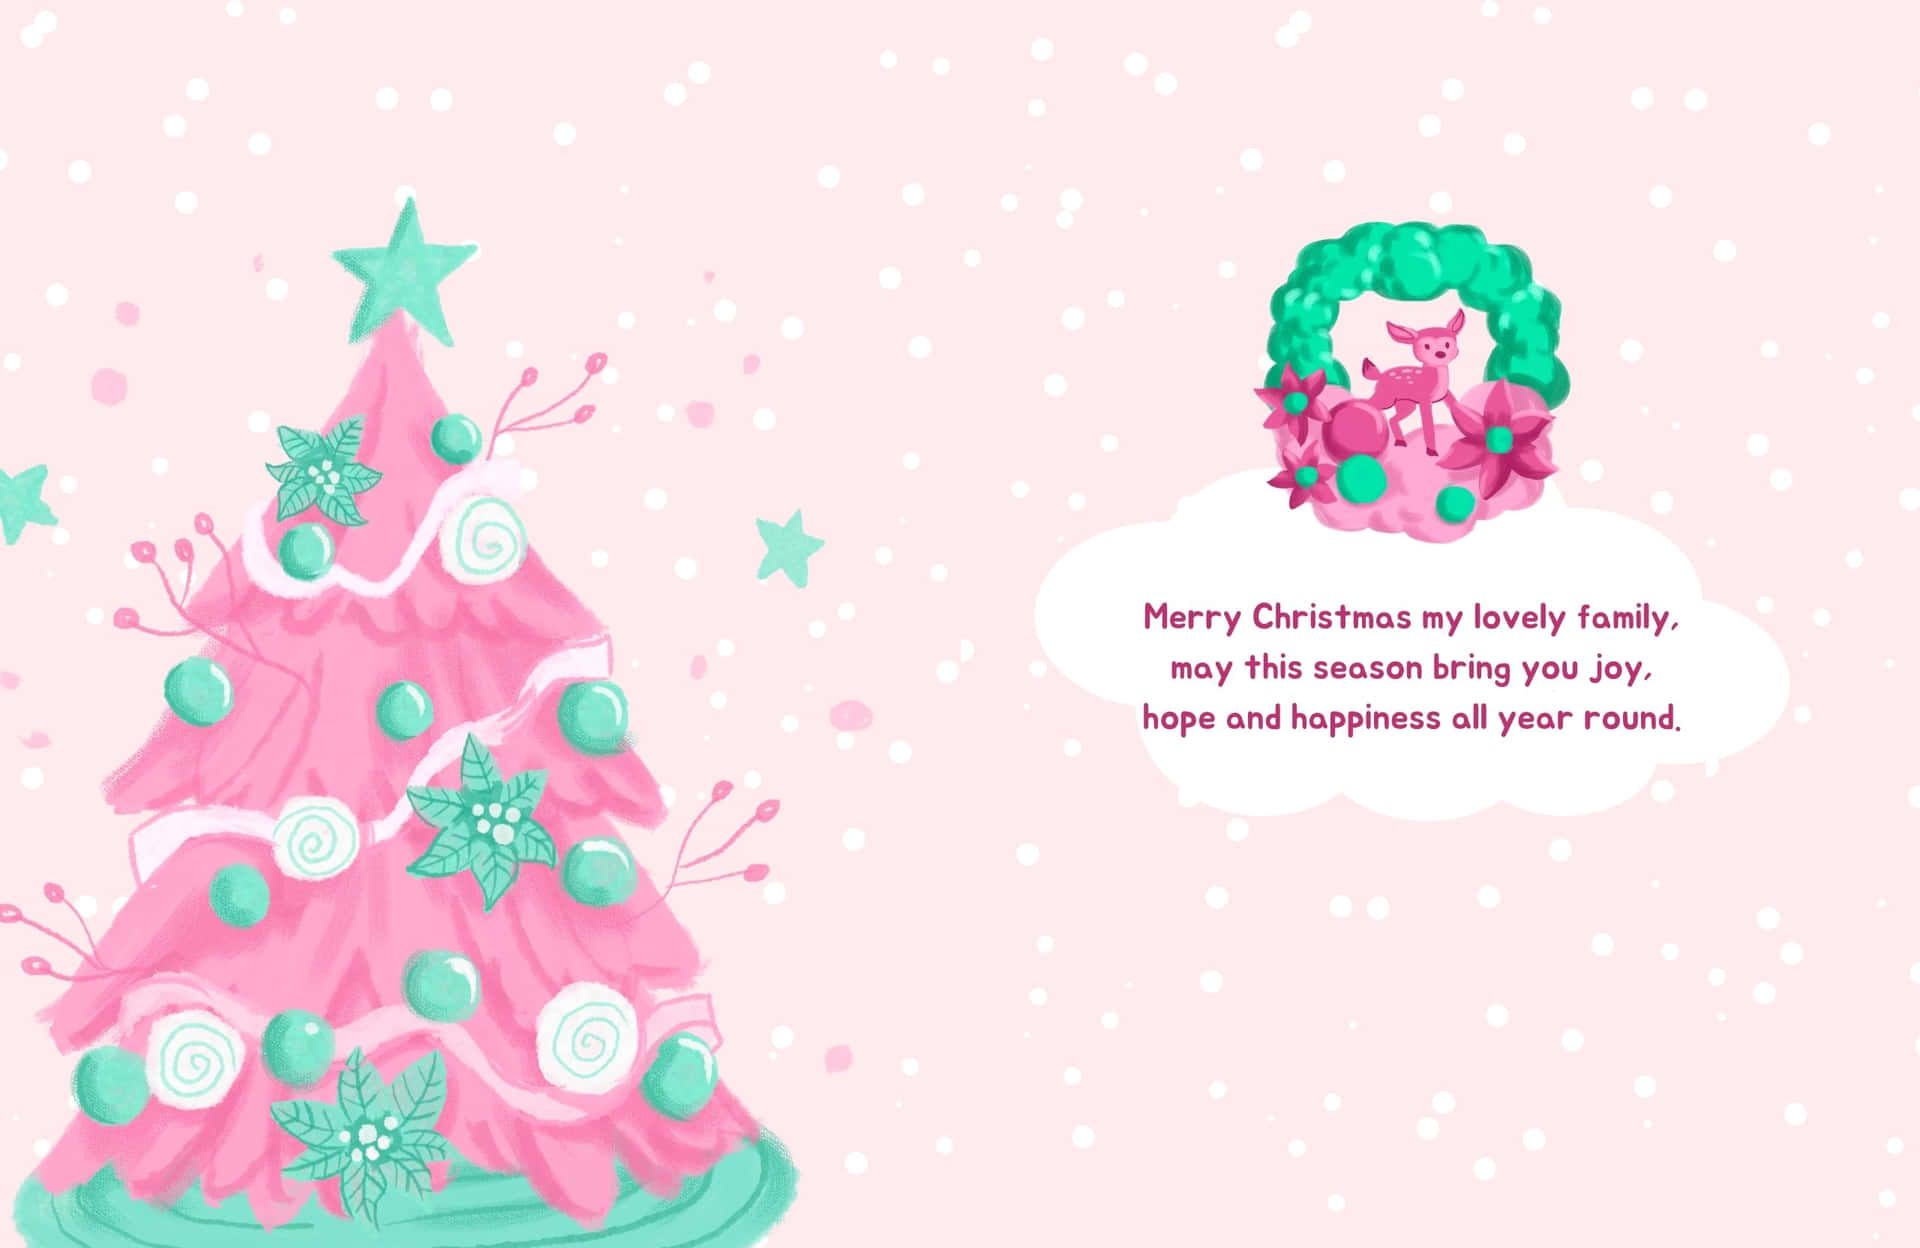 A sparkly pink Christmas background perfect for the holidays